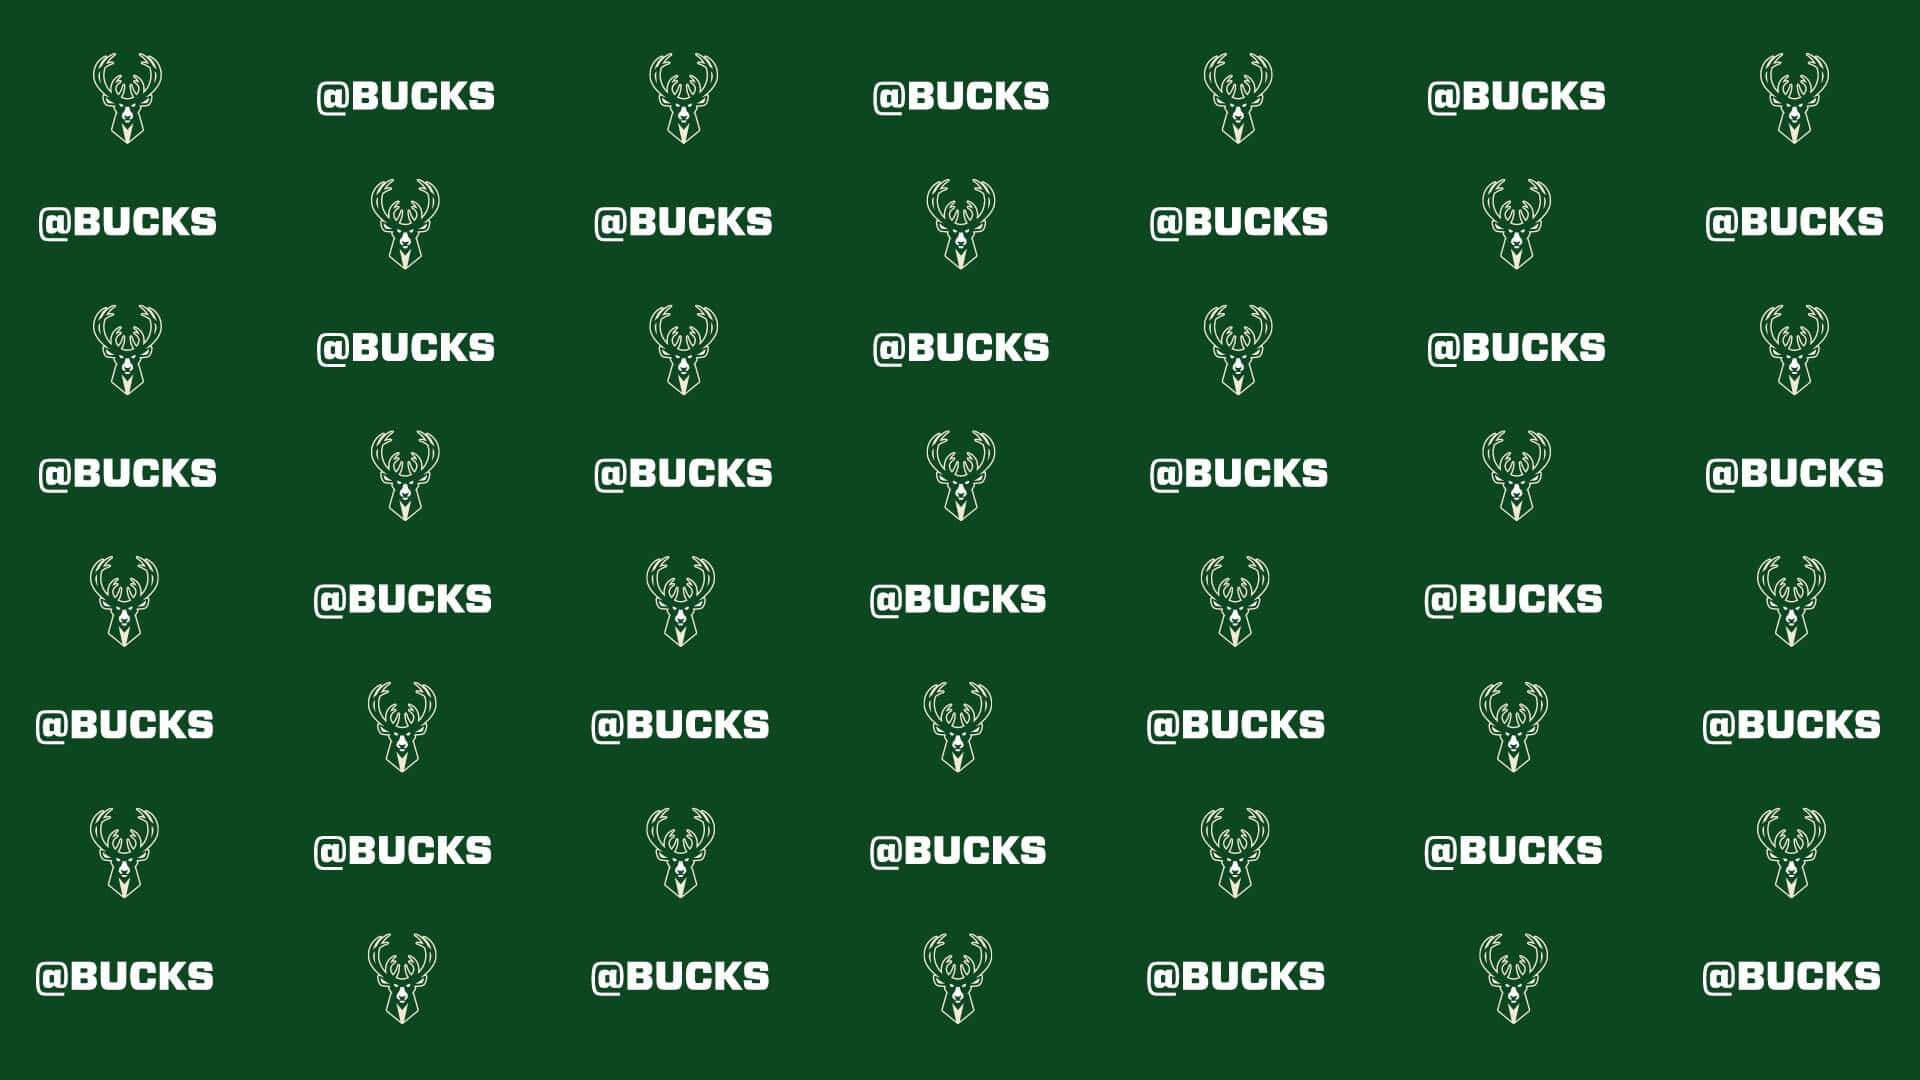 A Green Background With White And Green Buck Logos Wallpaper